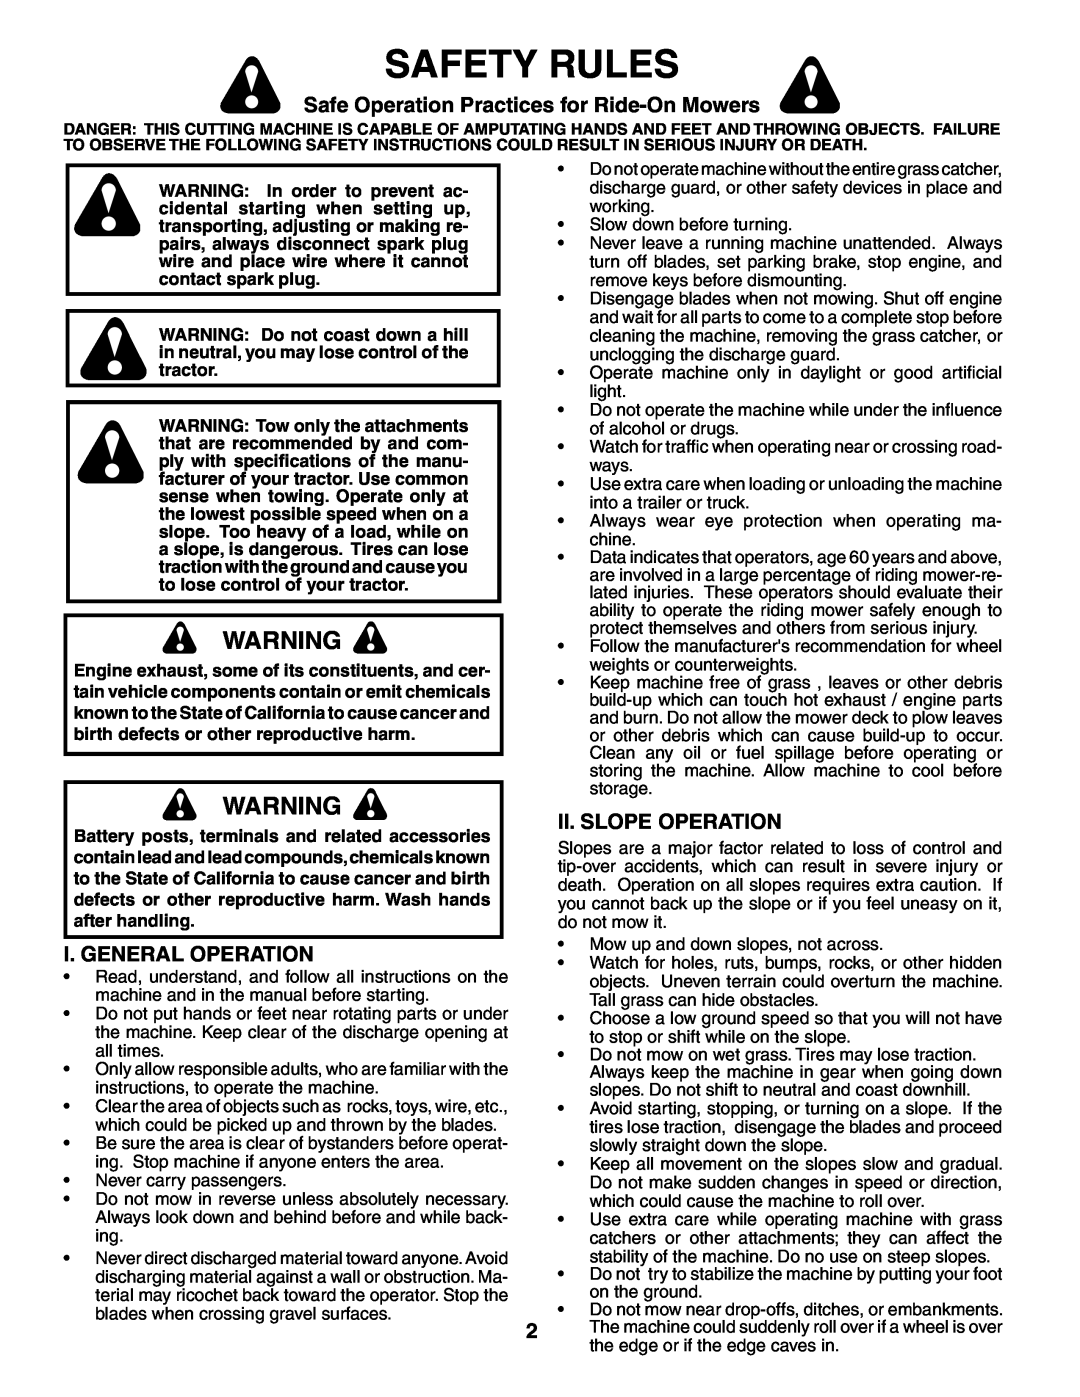 Husqvarna LT16542 Safety Rules, Safe Operation Practices for Ride-On Mowers, I. General Operation, Ii. Slope Operation 